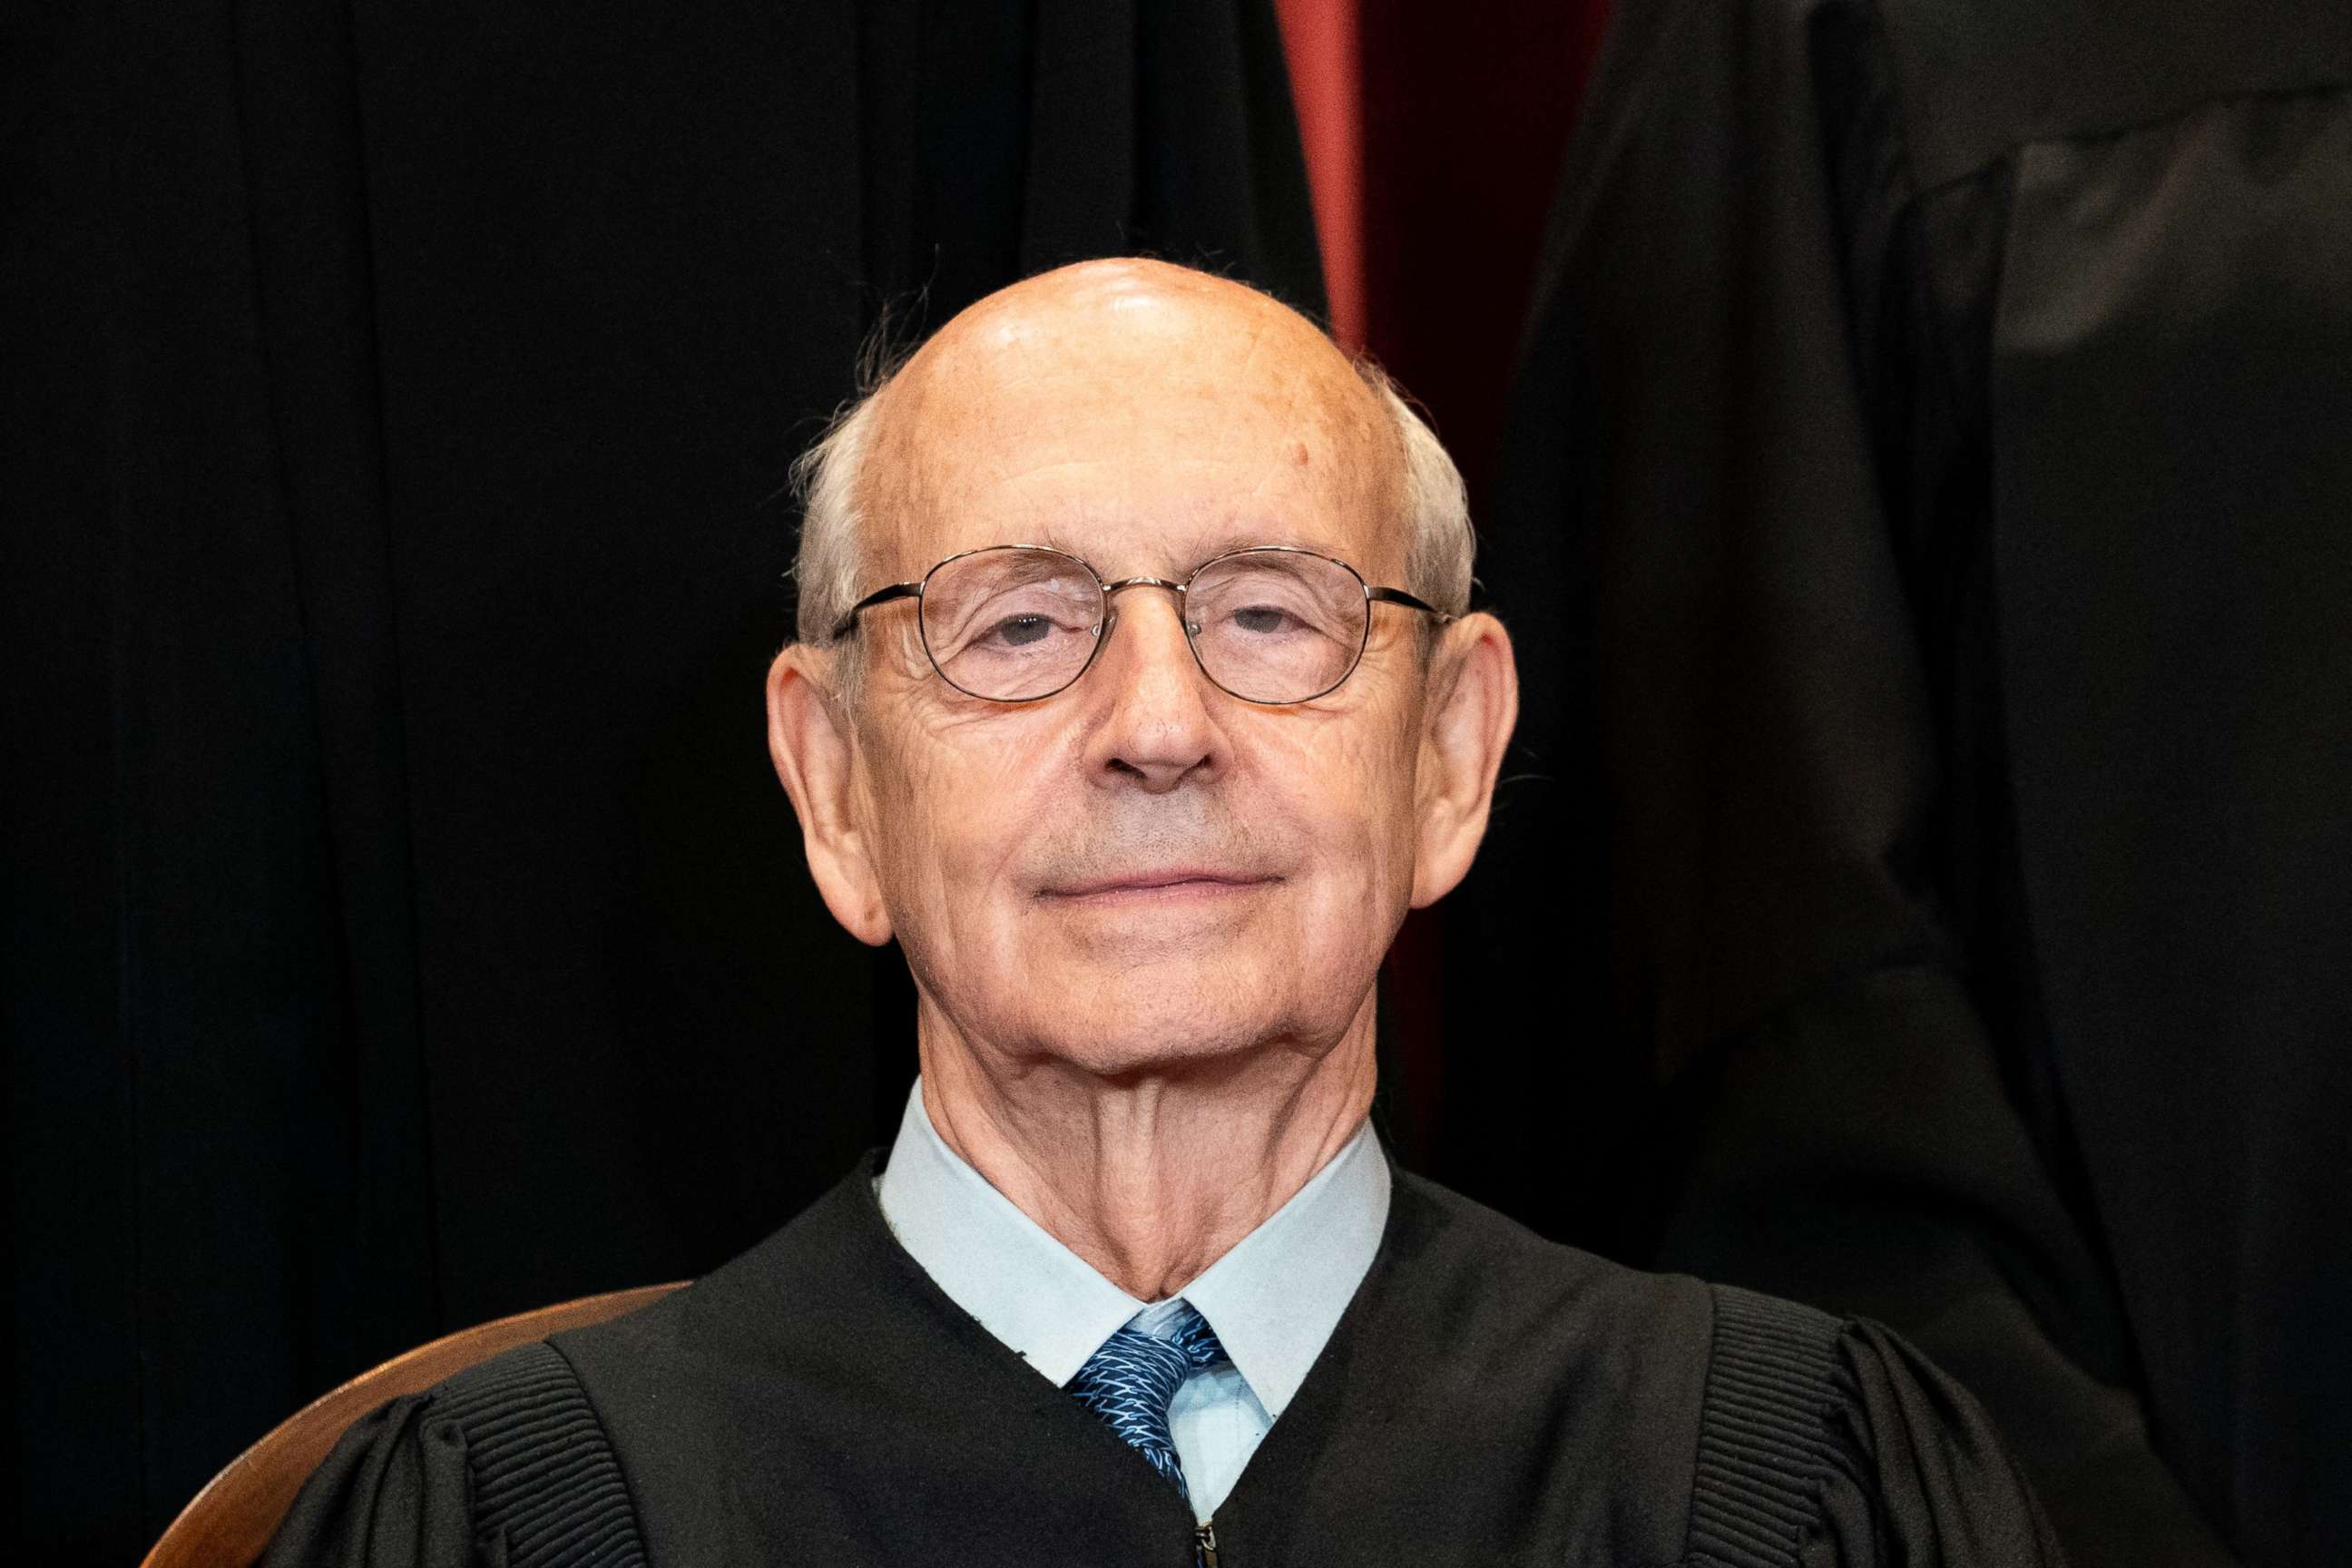 PHOTO: Associate Justice Stephen Breyer sits during a group photo of the Justices at the Supreme Court in Washington on April 23, 2021.